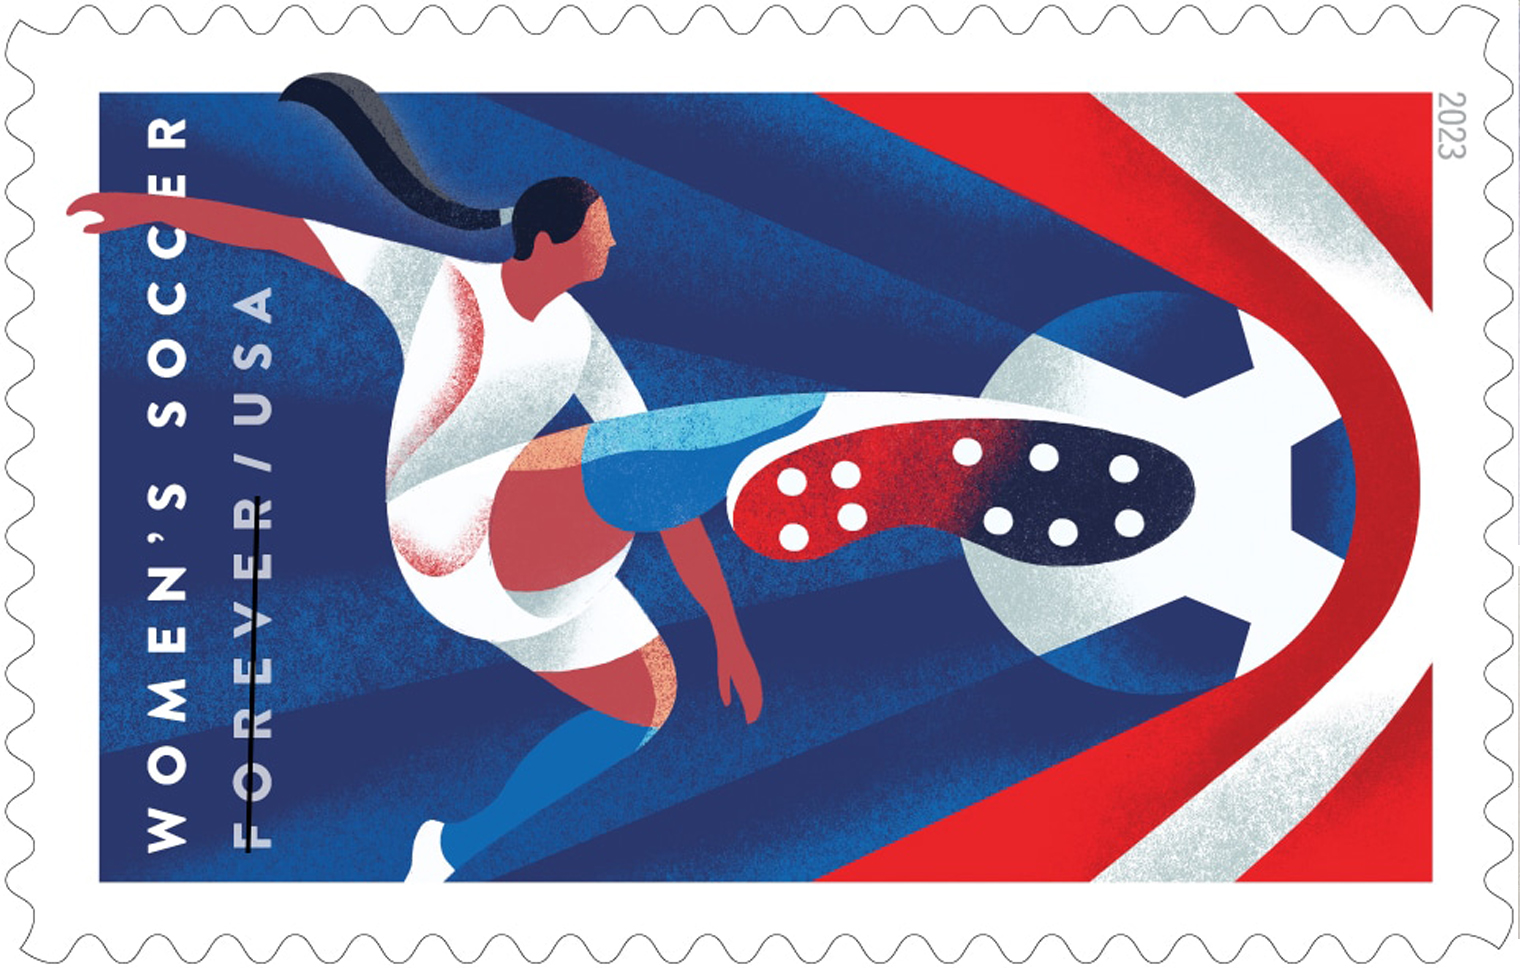 Soccer stamp features a soccer player where the focal point is her foot striking a ball in the foreground.